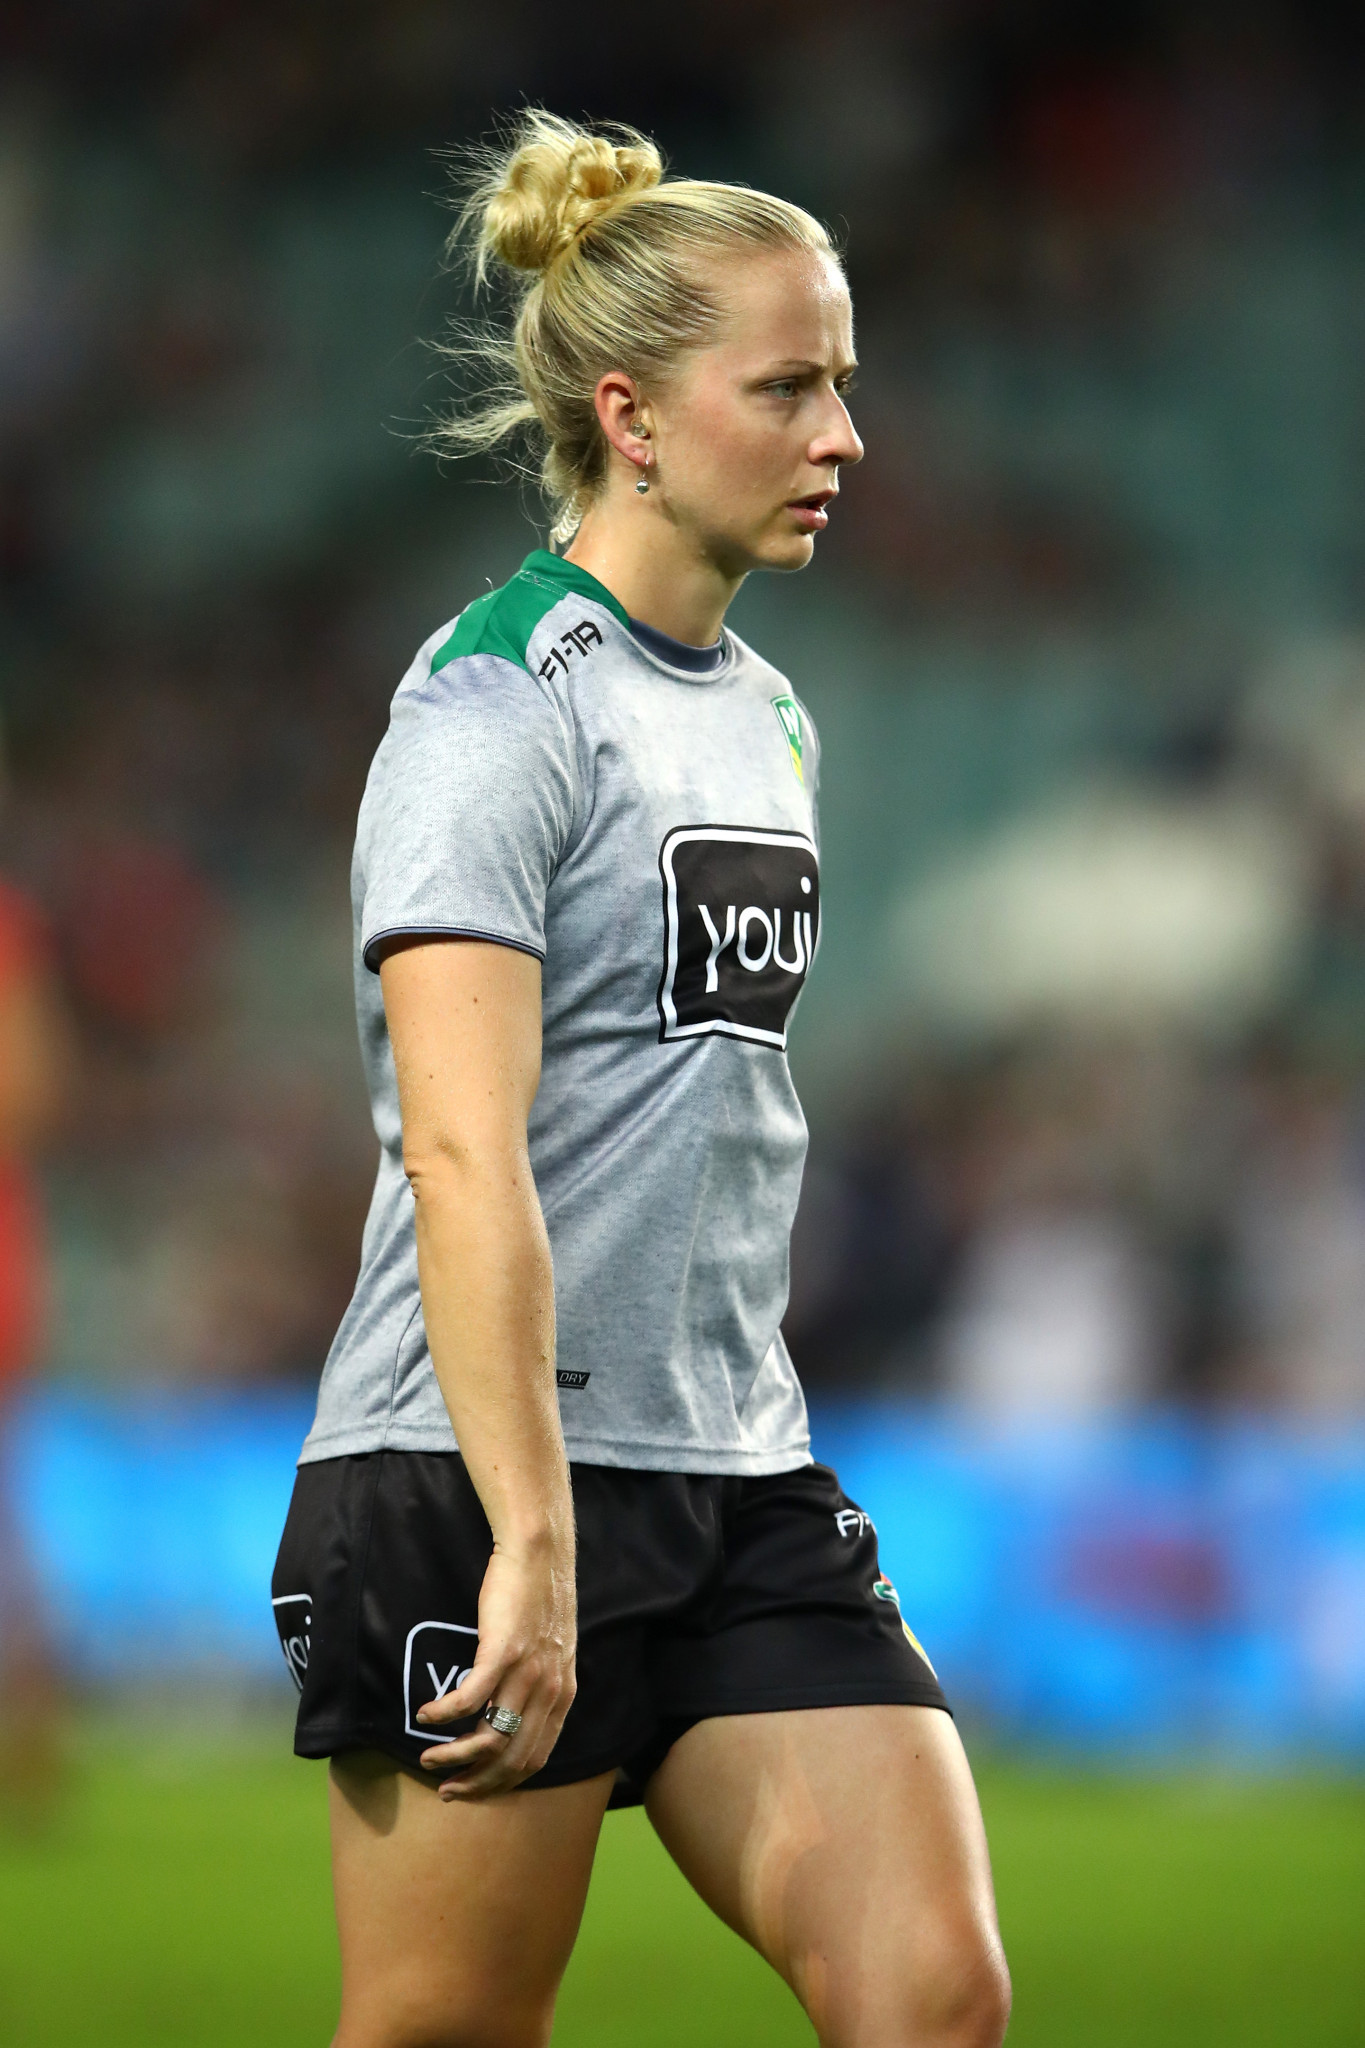 Belinda Sleeman, who will be the first woman ever to officiate at a Rugby League World Cup ©Getty Images